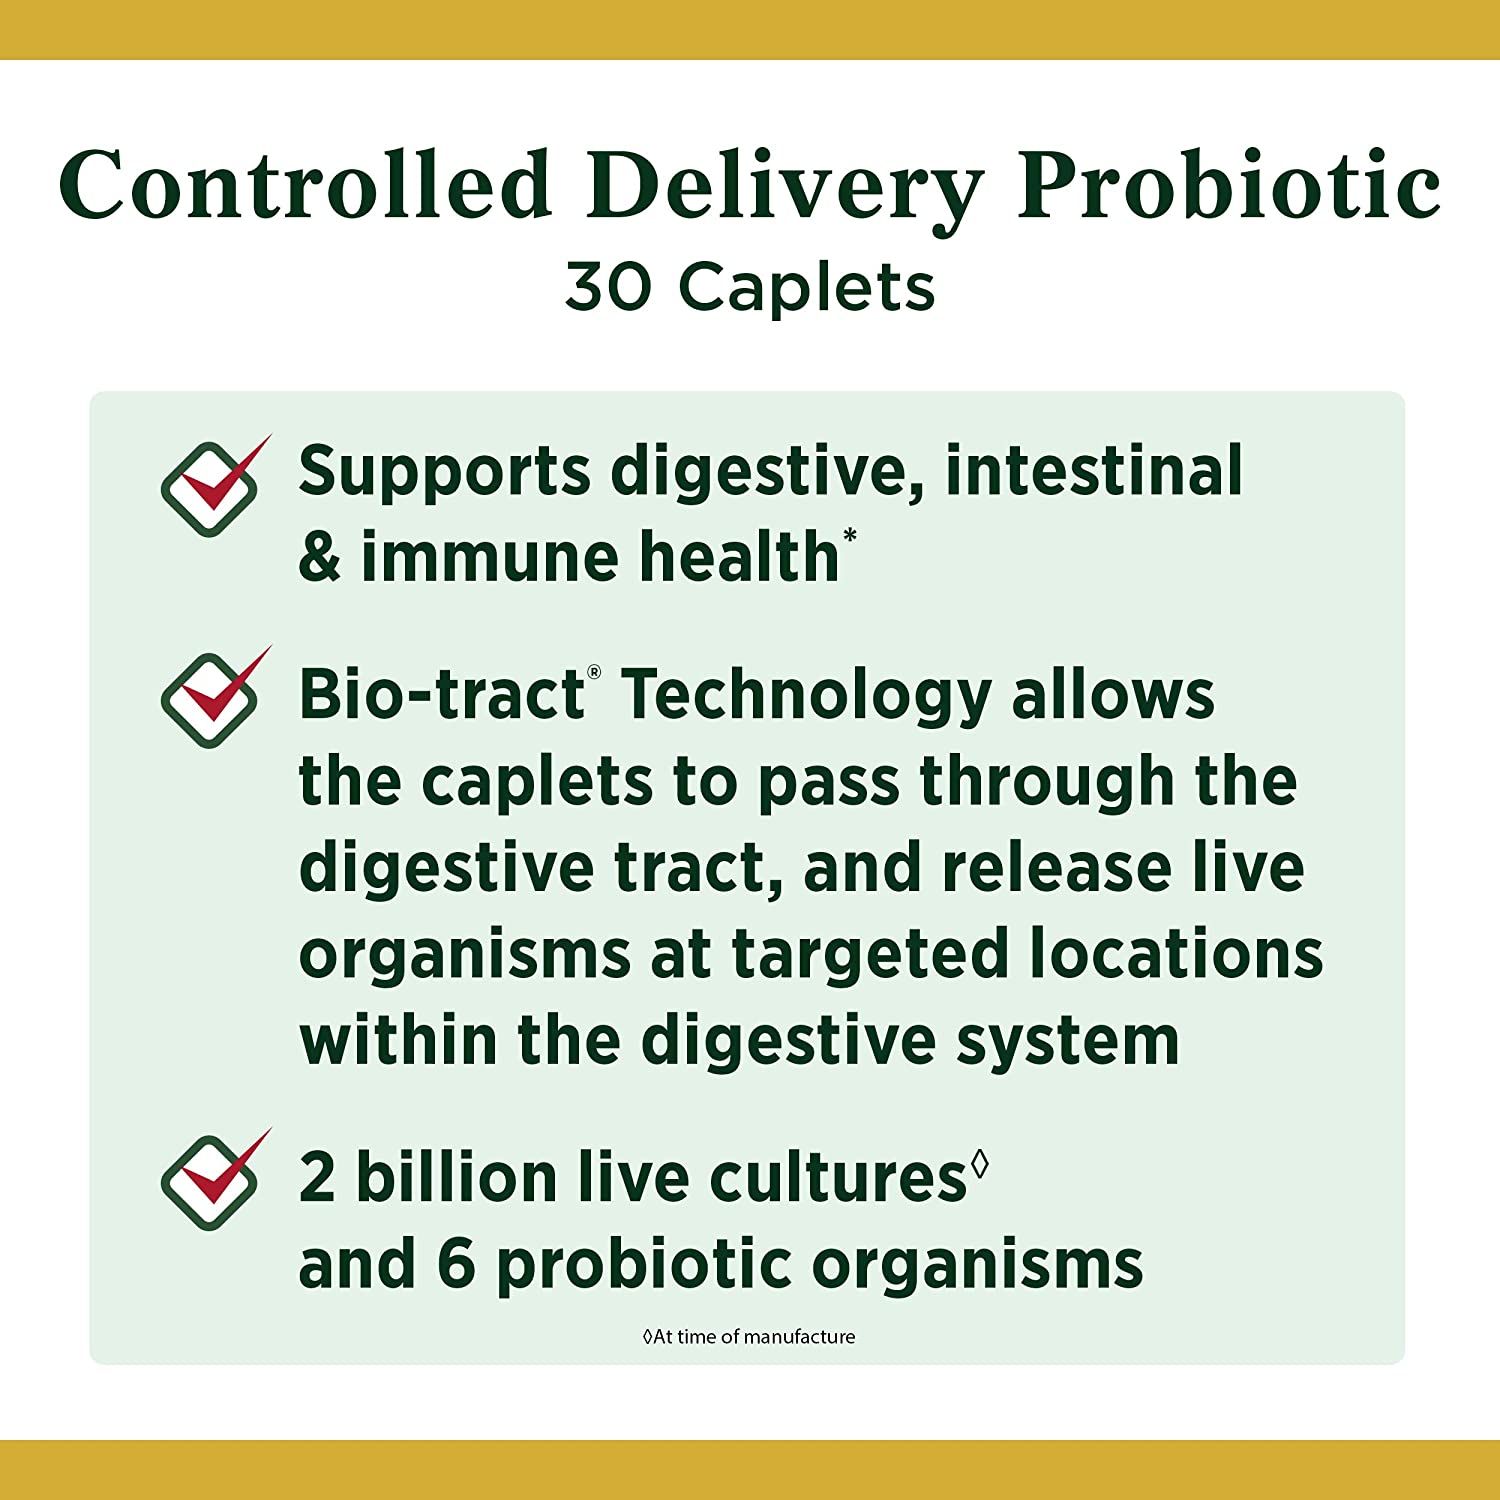 Nature's Bounty Controlled Delivery Probiotic Caplets - 30 ct